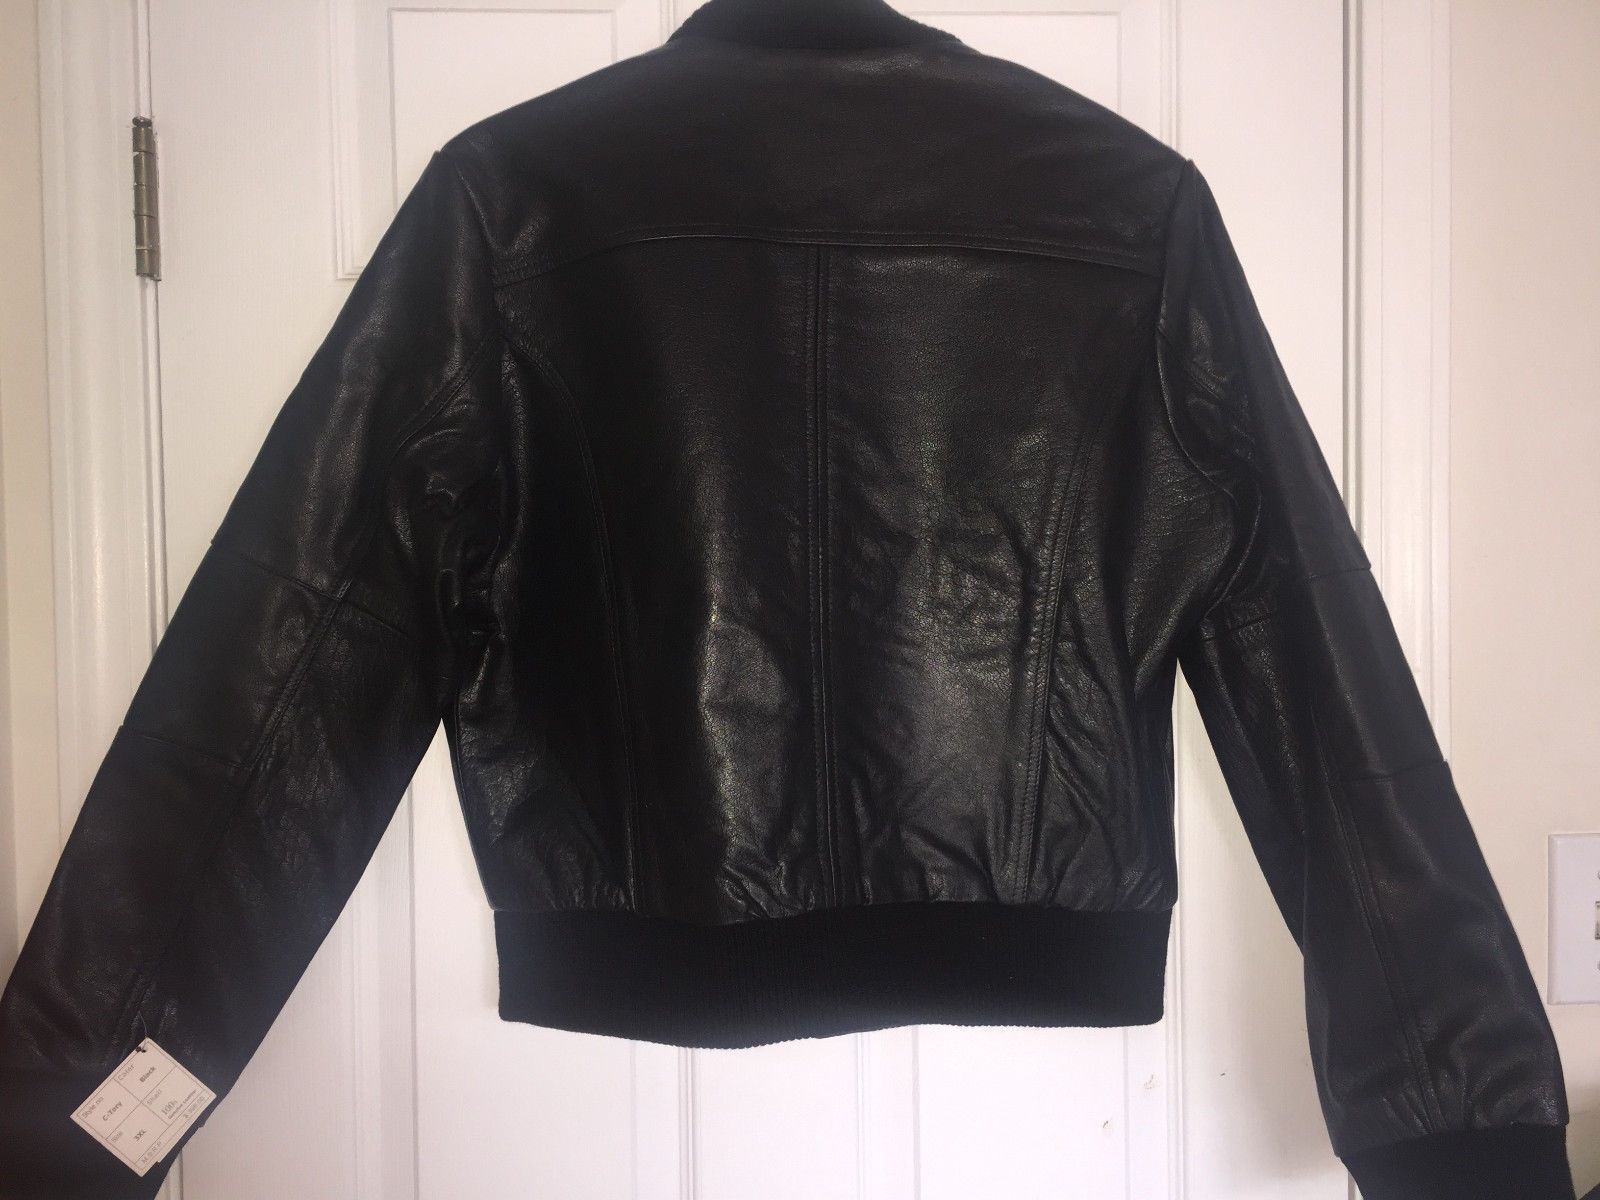 TANNERS AVENUE DISTRESSED LEATHER BASEBALL BOMBER JACKET SIZE 3XL - NWT ...